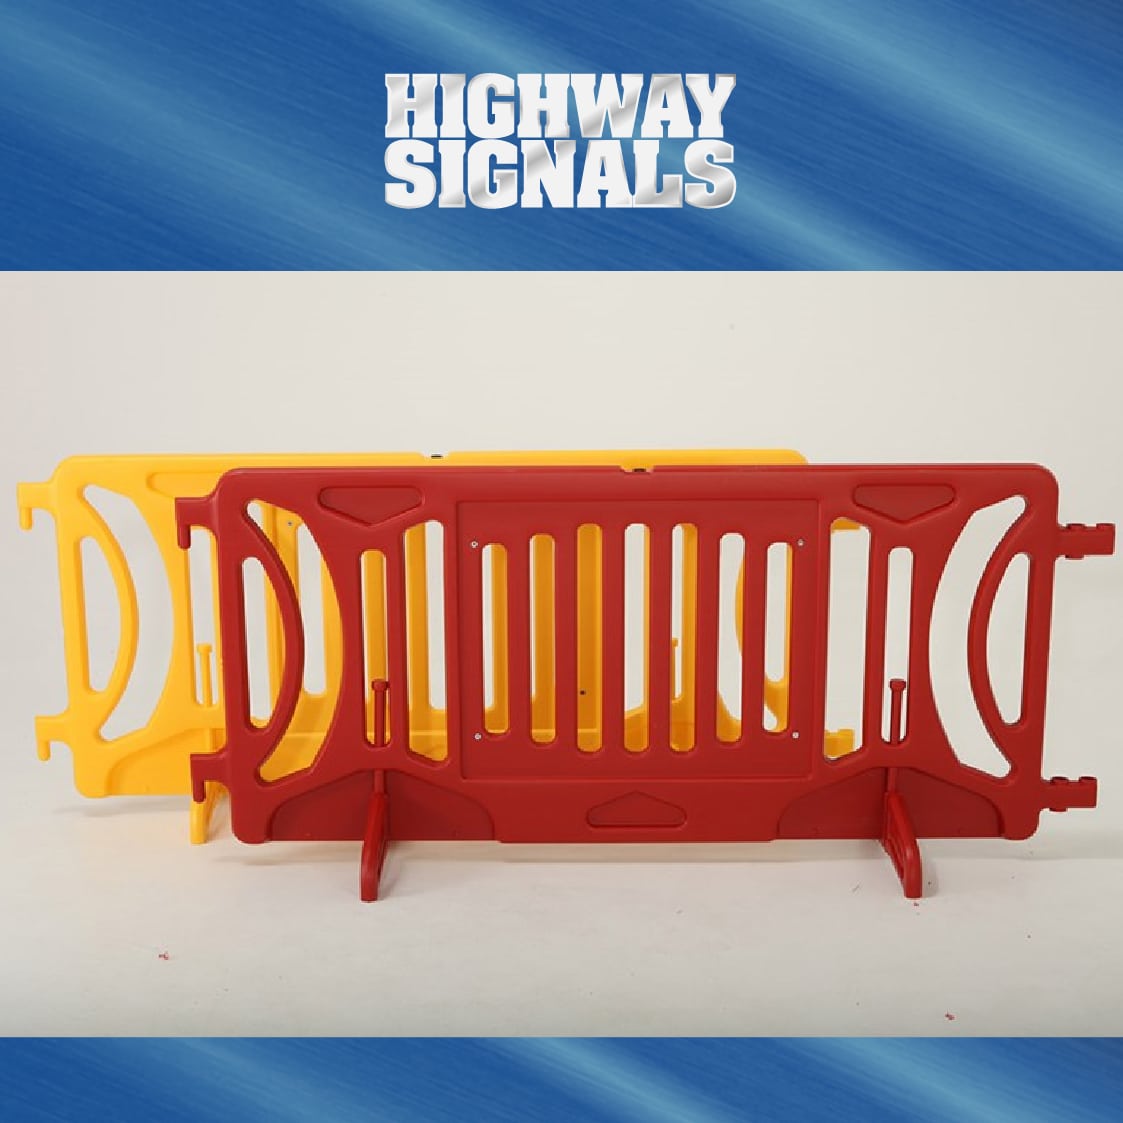 42 x 96 Plastic Barricades In Red And Yellow